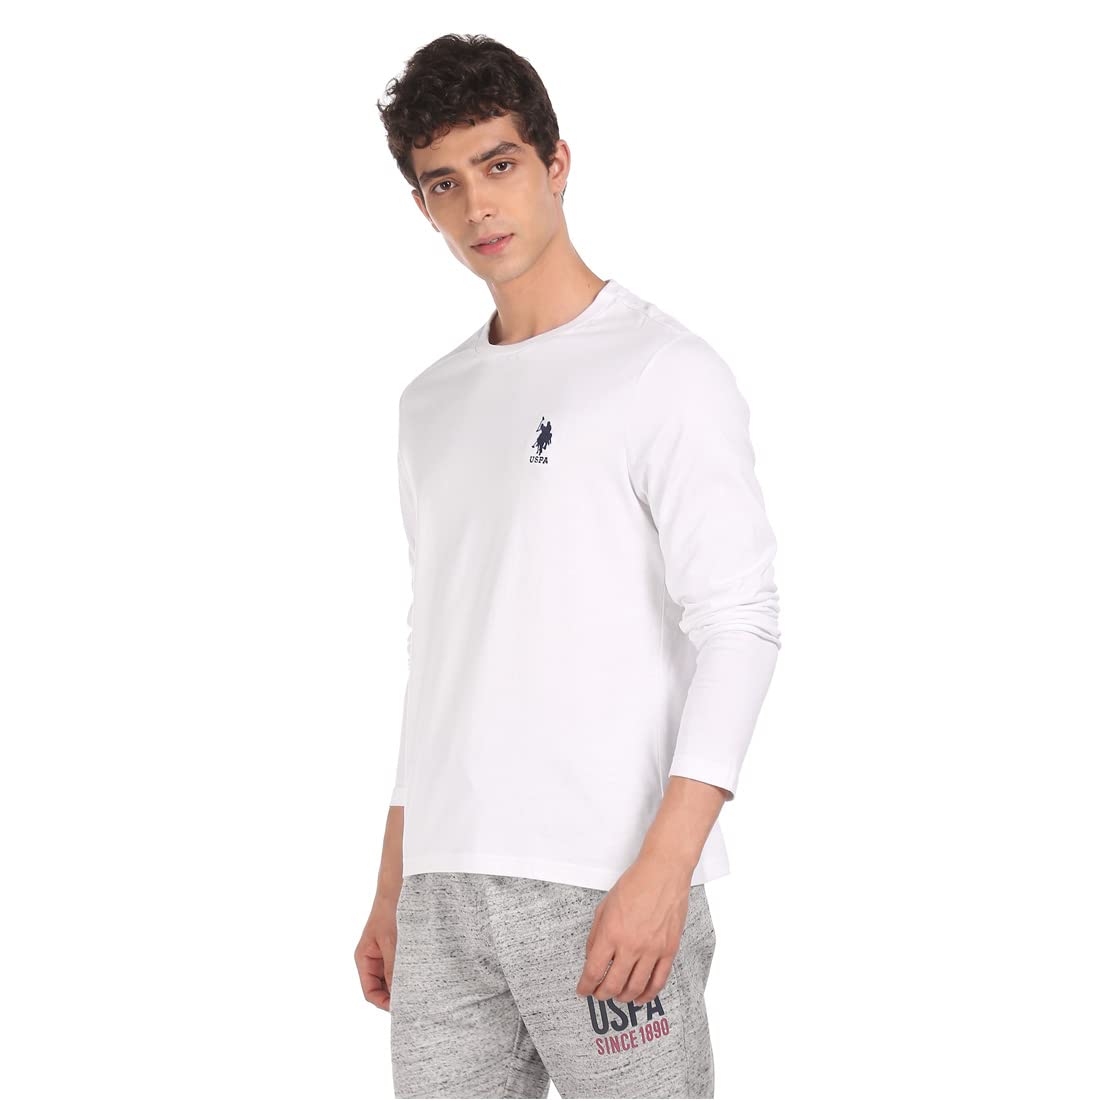 U.S. POLO ASSN. Men Pure Cotton Long Sleeve Solid I693 T-Shirt - Pack of 1 (White L)